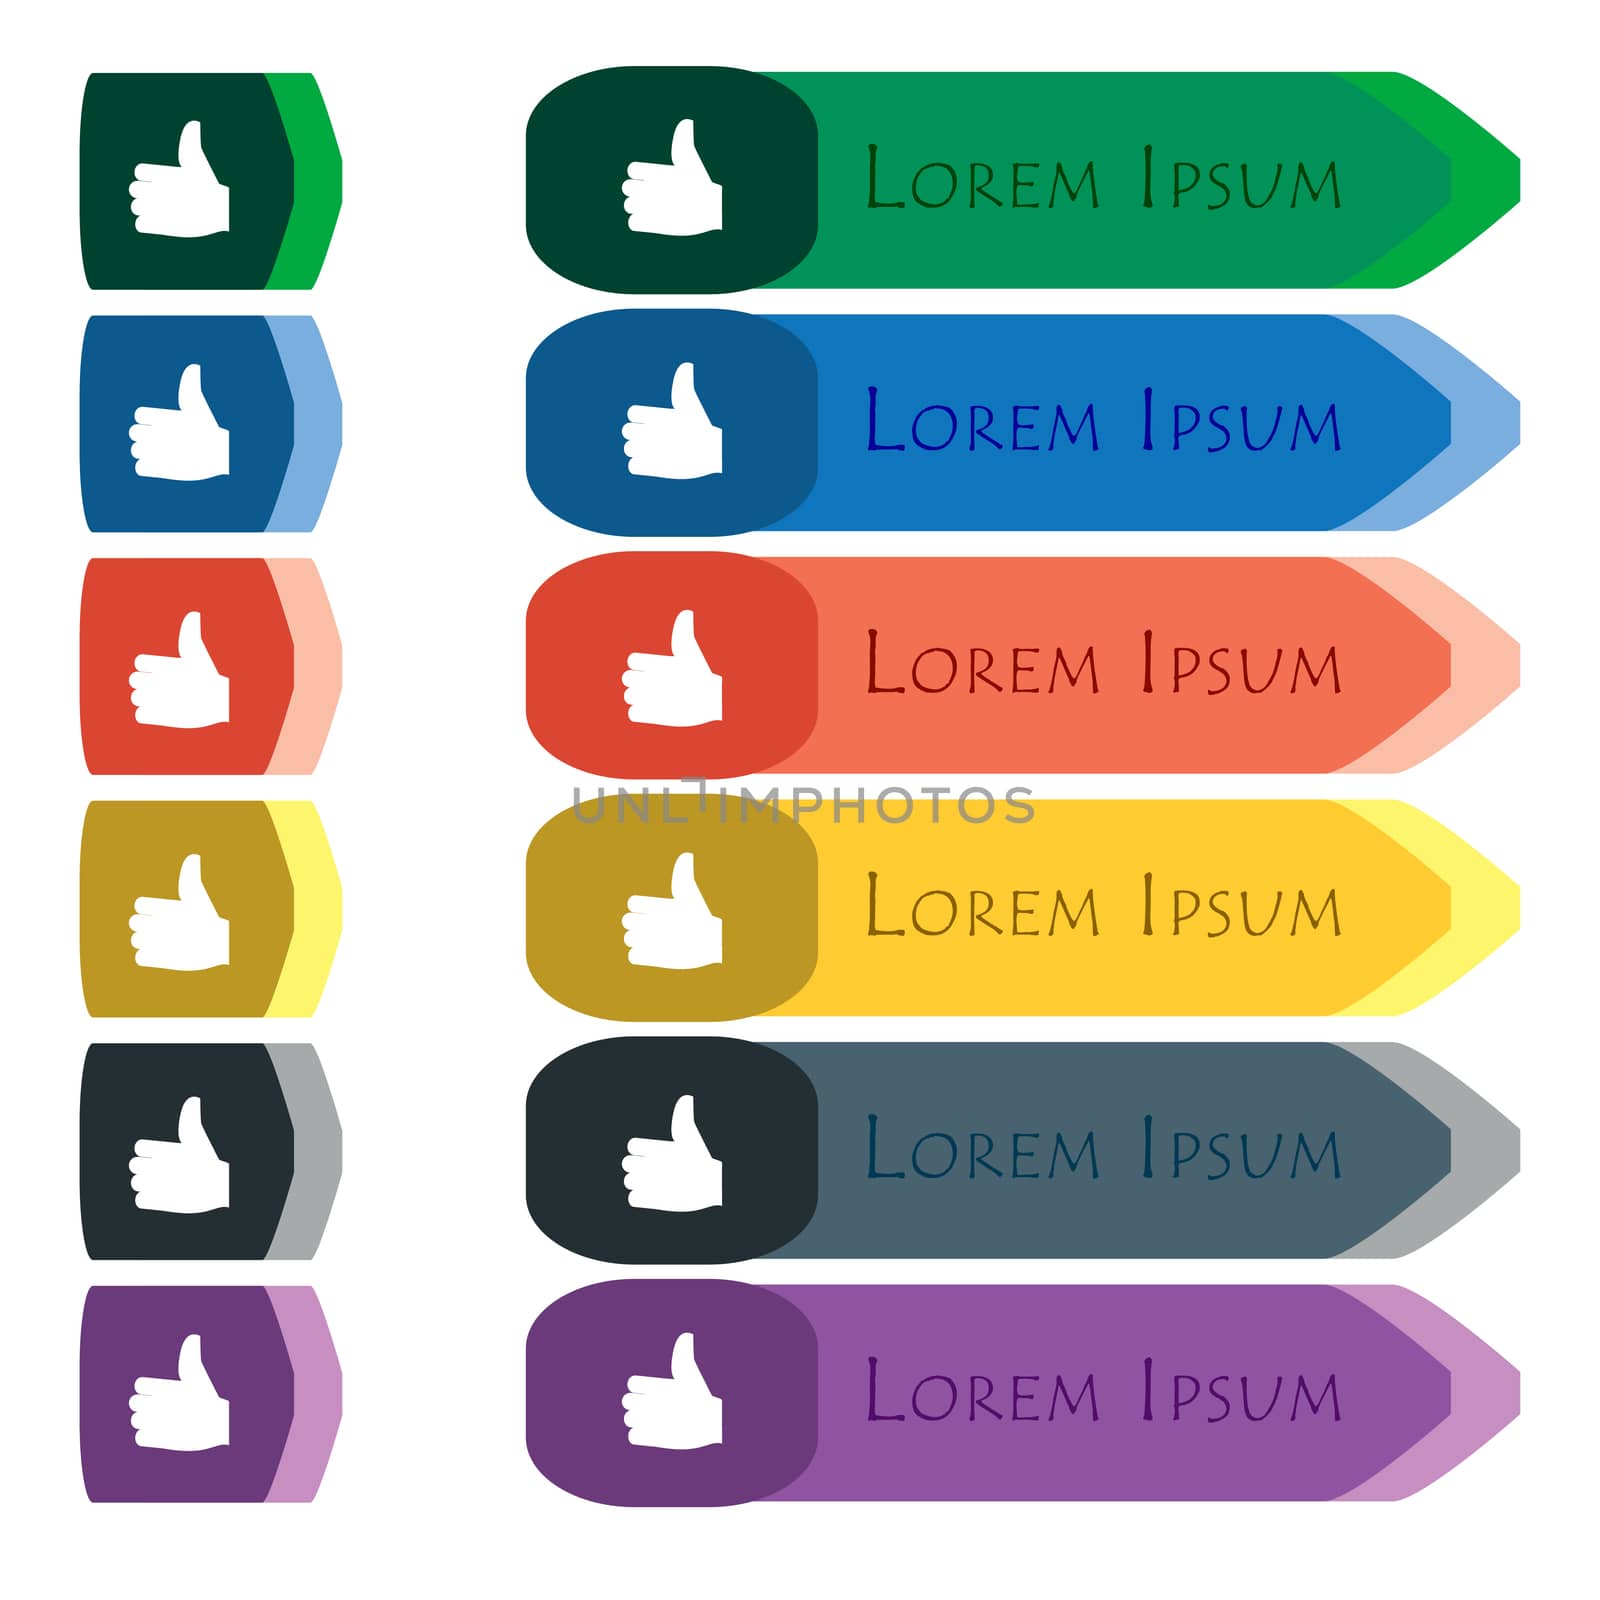 Like, Thumb up icon sign. Set of colorful, bright long buttons with additional small modules. Flat design. 